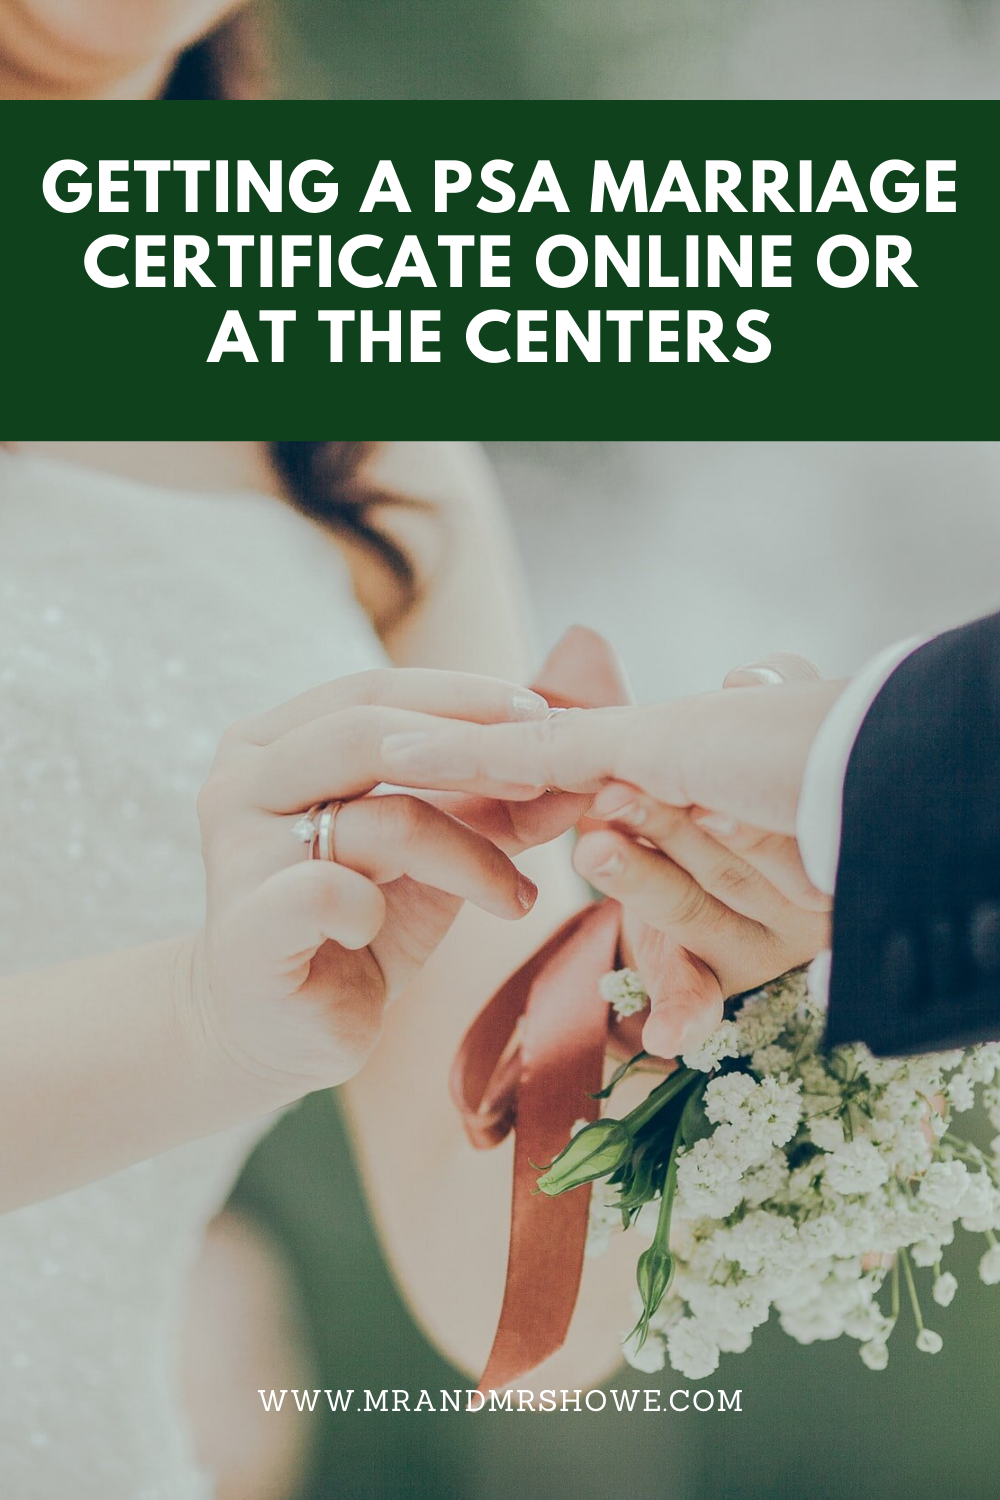 Getting a PSA Marriage Certificate Online or at the Centers 1.png